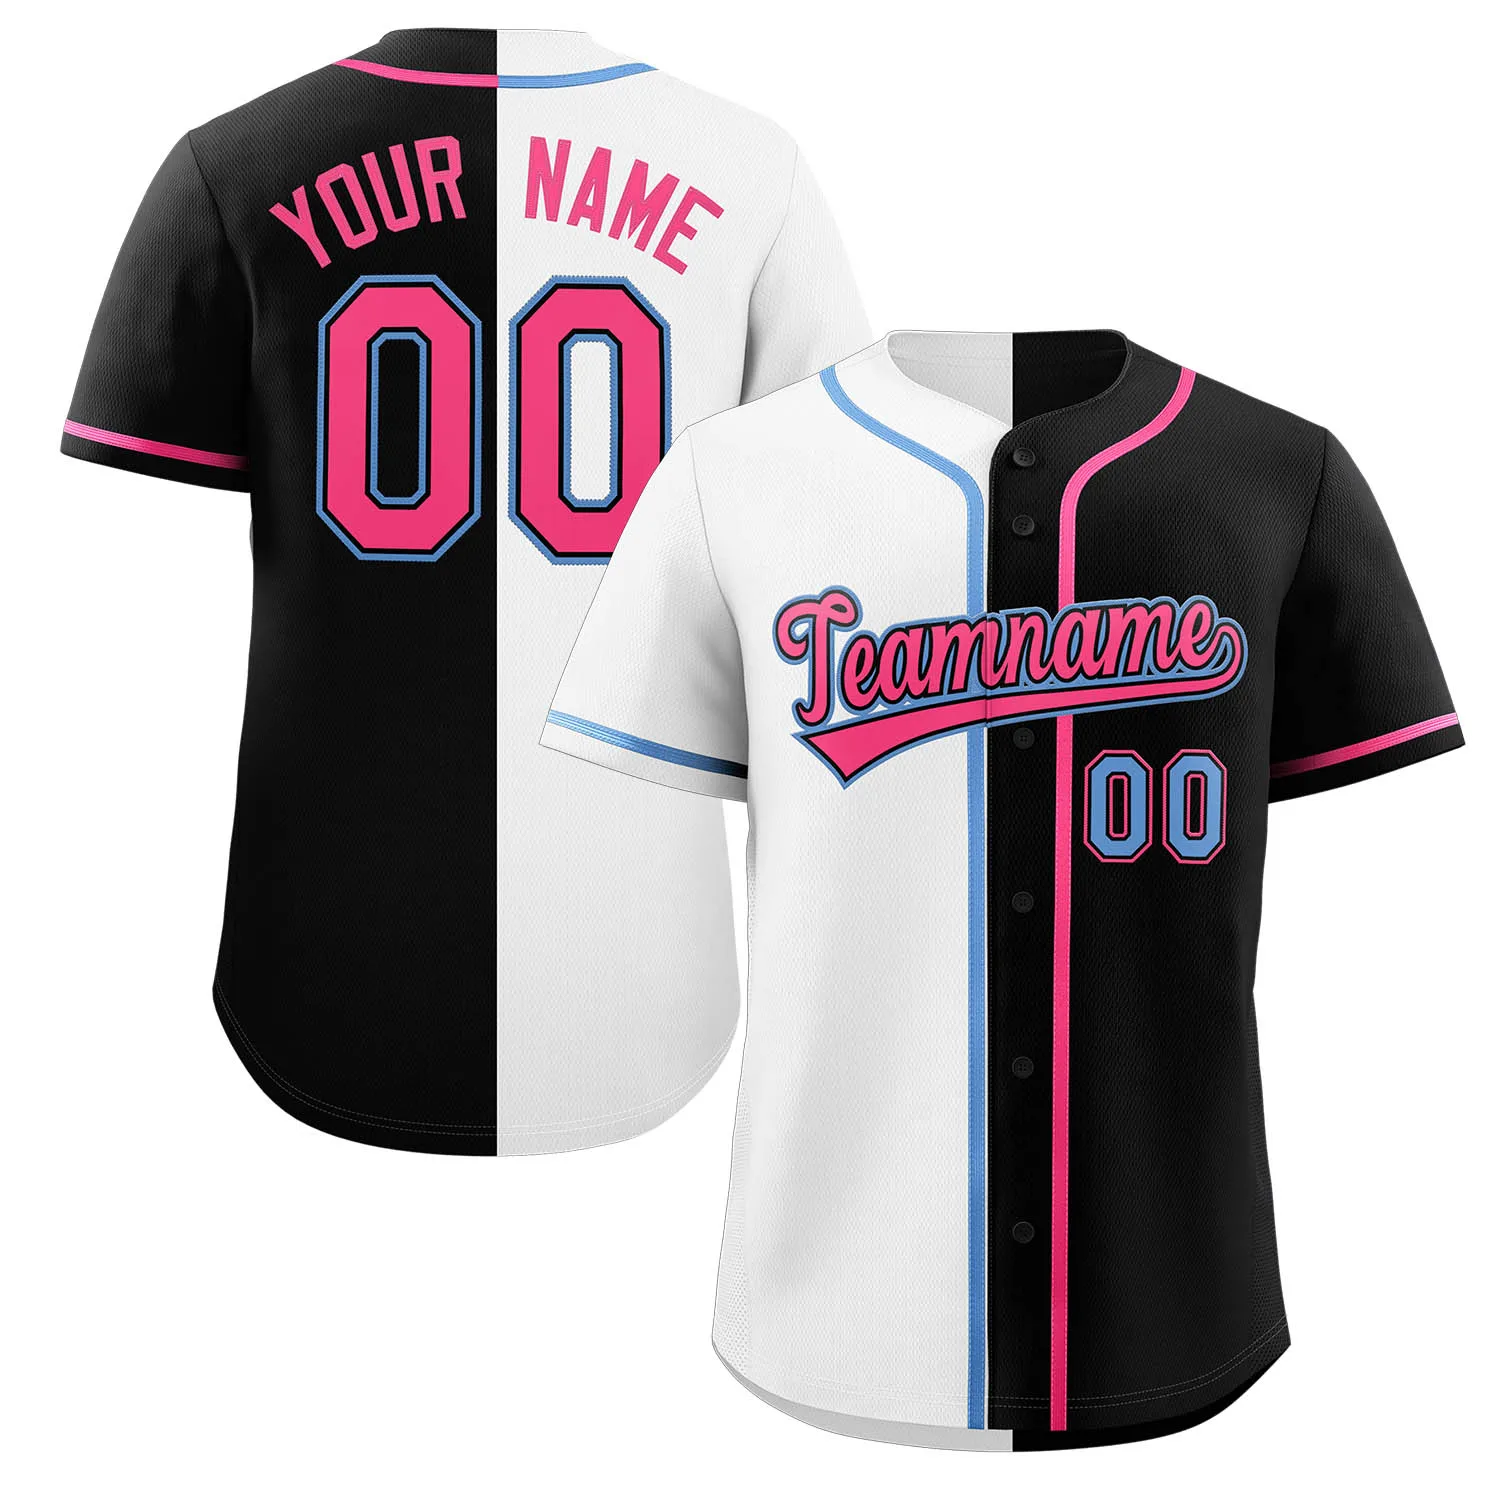 

Custom Baseball Jersey Full Sublimated Team Name&Numbers Breathable Button-down V-neck Shirts Adults/Kids Softball Uniforms